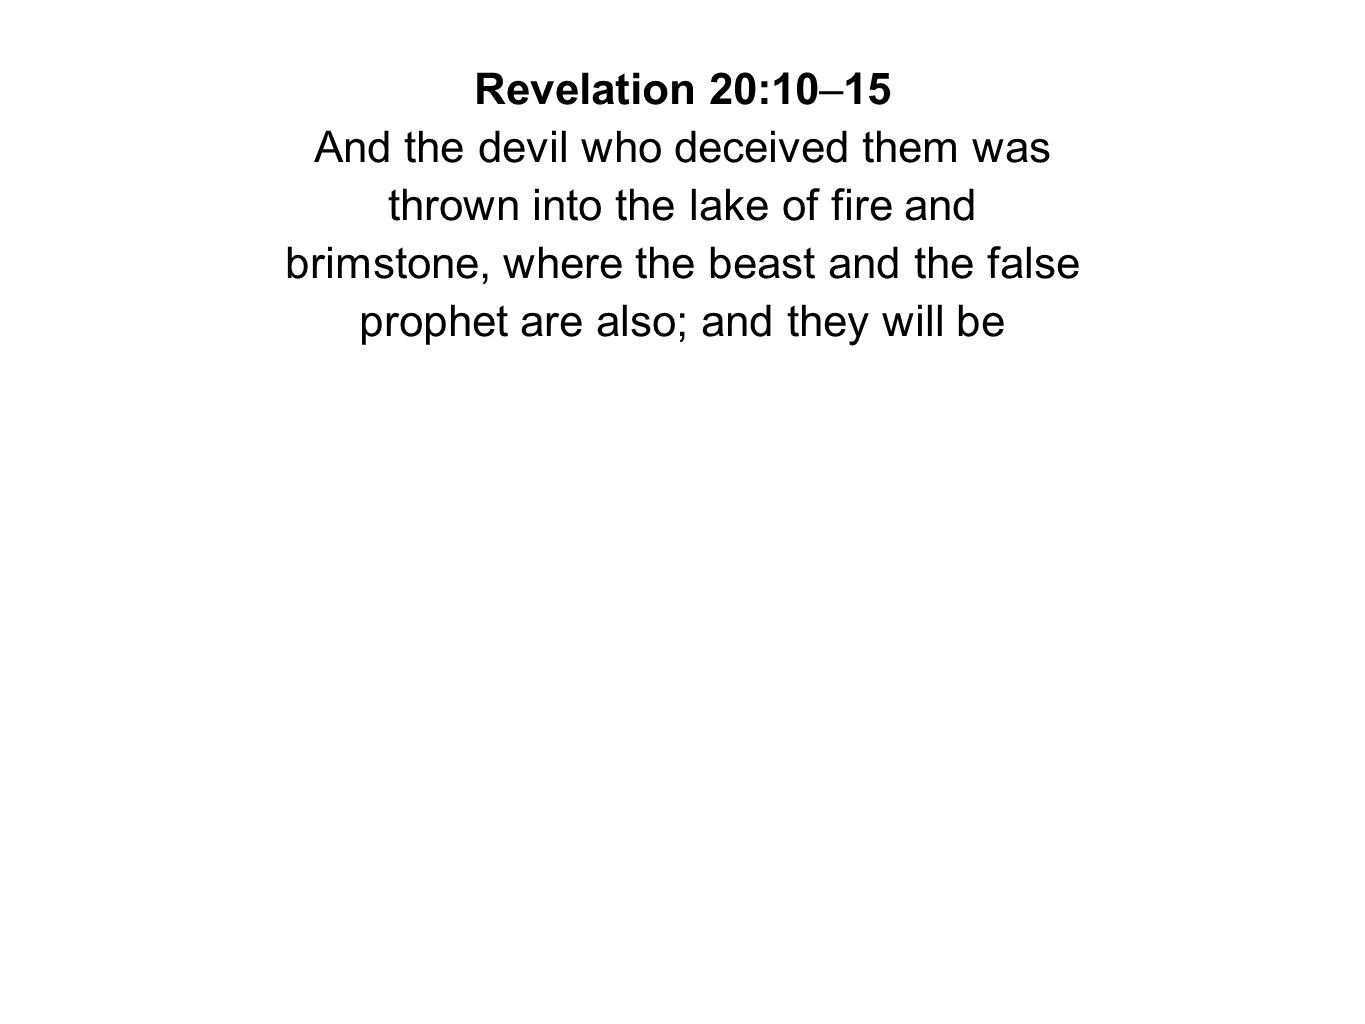 Revelation 20:10–15 And the devil who deceived them was thrown into the lake of fire and brimstone, where the beast and the false prophet are also; and they will be